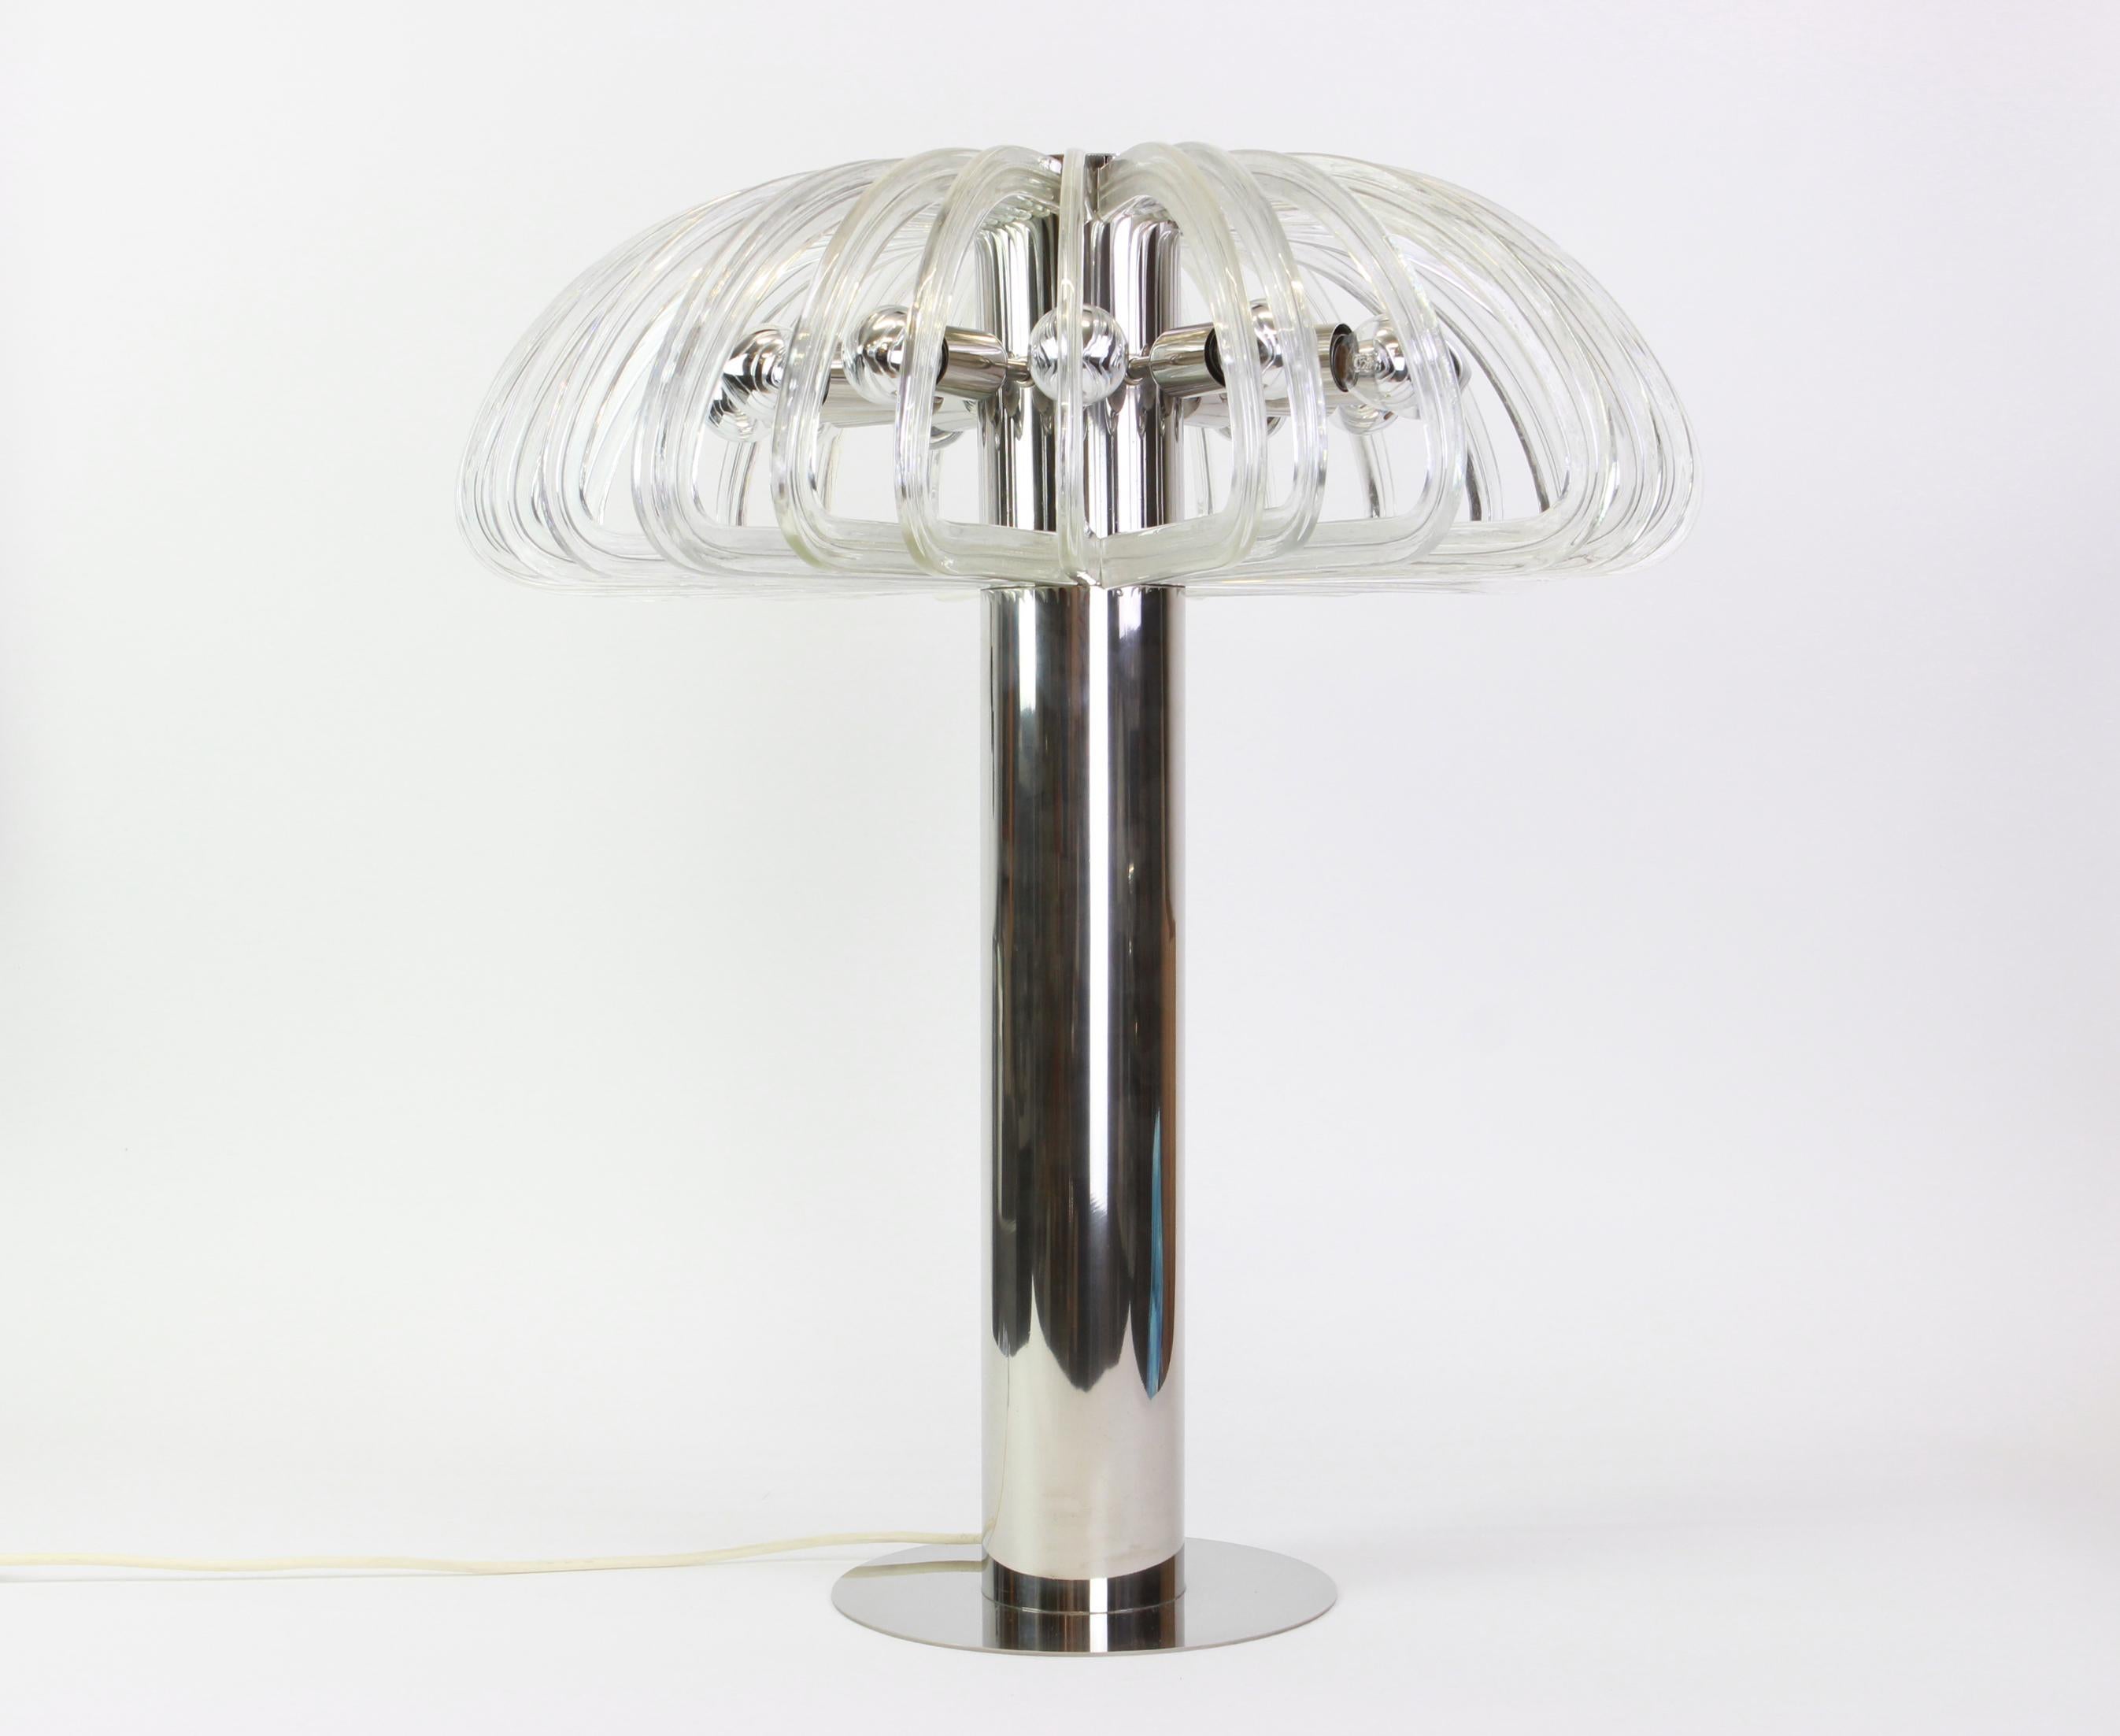 Stunning huge crystal glass table lamp Quazar by Bakalowits in Vienna in the 1960s, wonderful nickel-plated from with original crystal glasses.

Good condition with small signs of age and use, professionally cleaned and ready to use.
The light